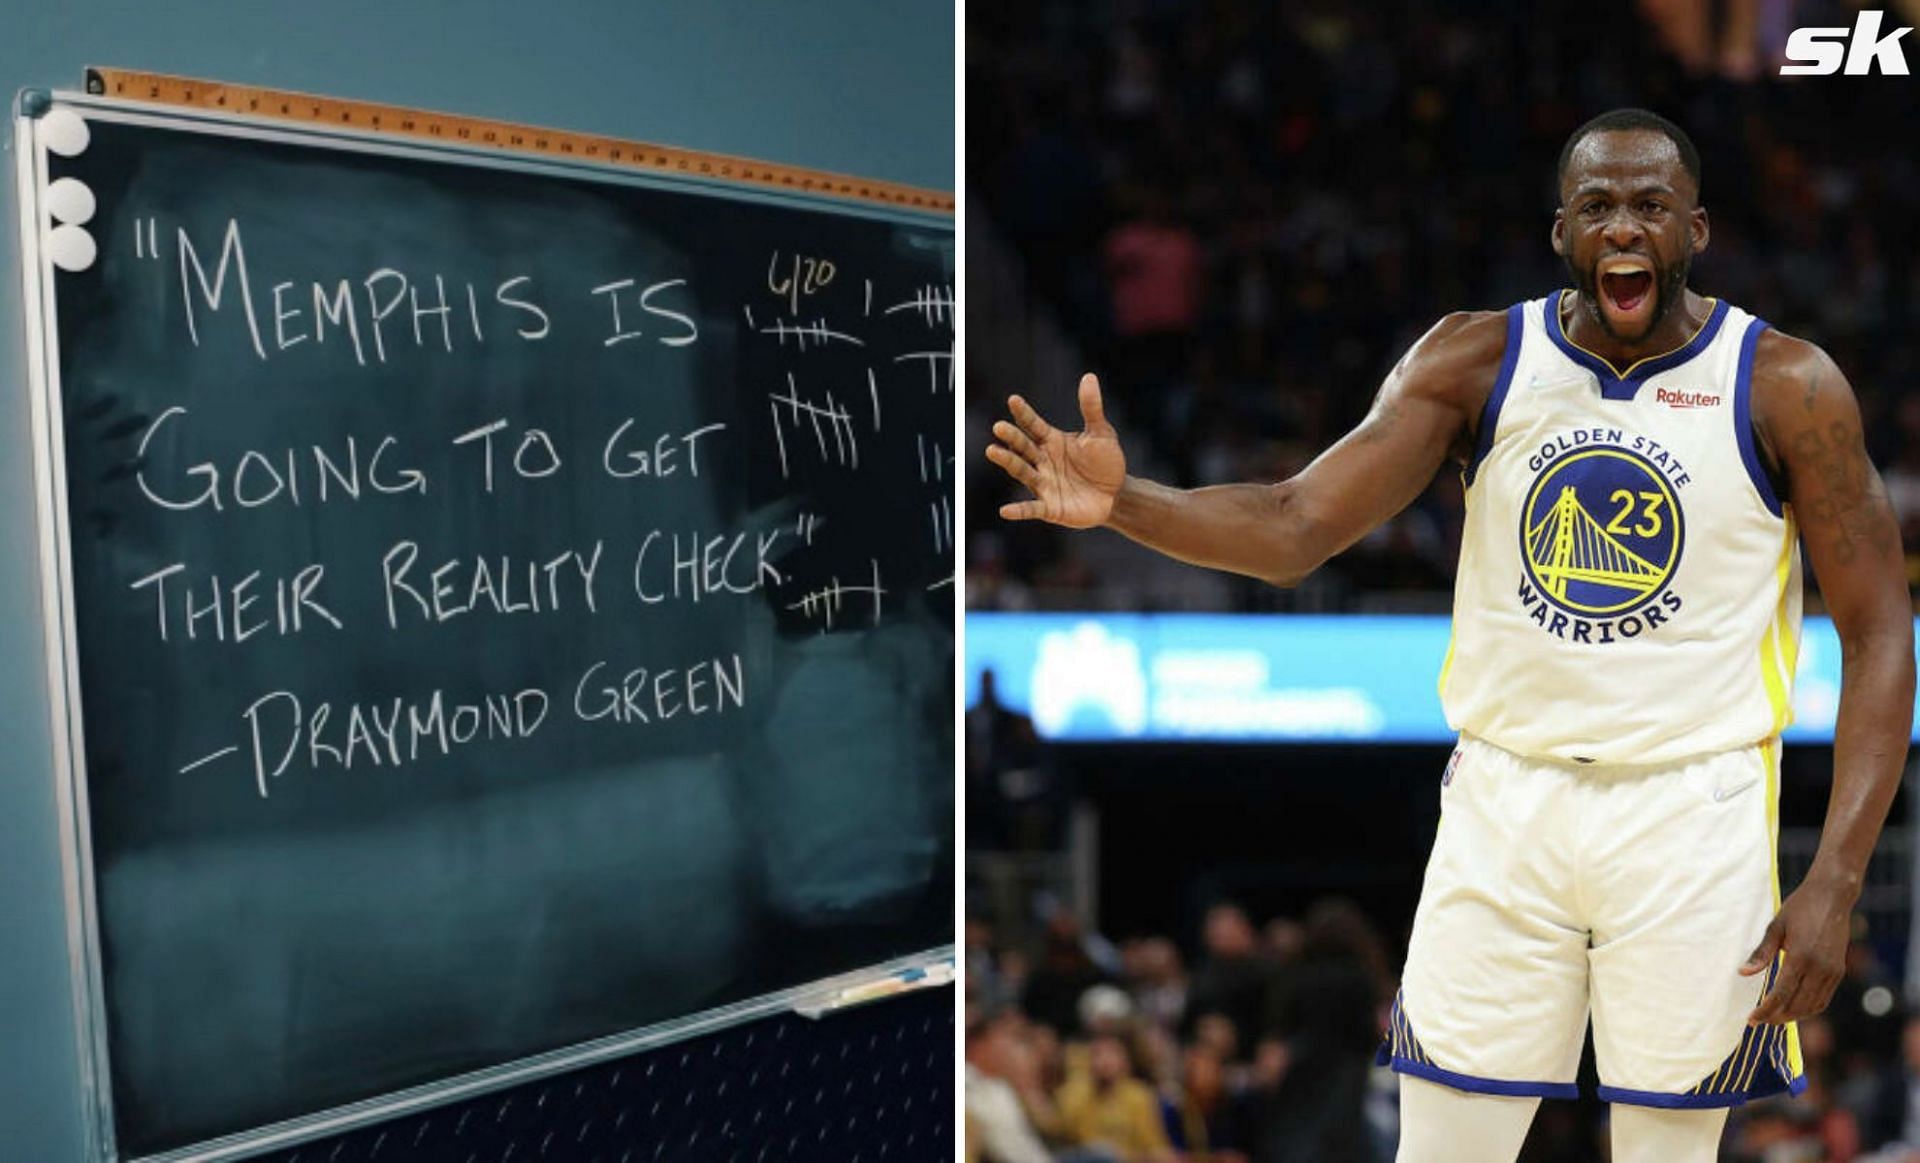 Memphis Grizzlies gym features Warriors star Draymond Green&#039;s quote.